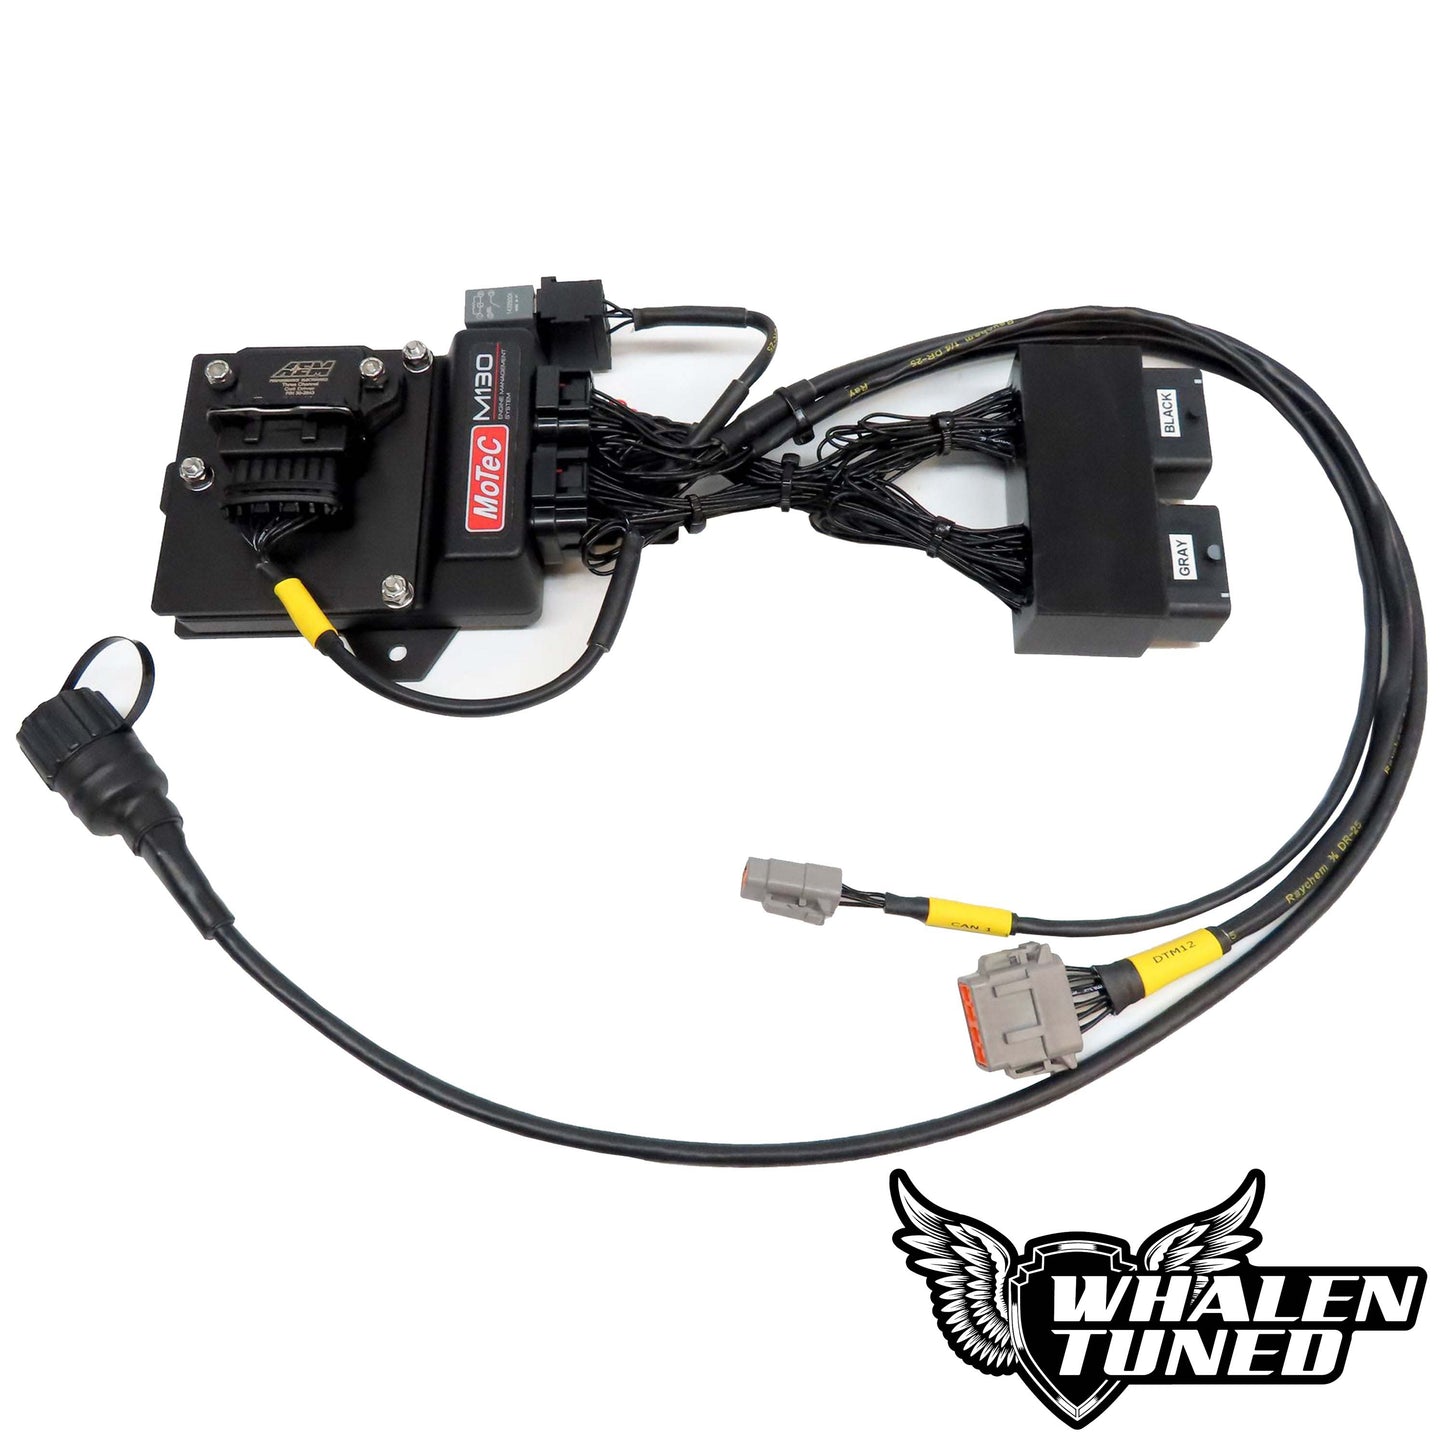 WSRD Stock Injector Tuning Packages | Can-Am X3 (177-247HP)